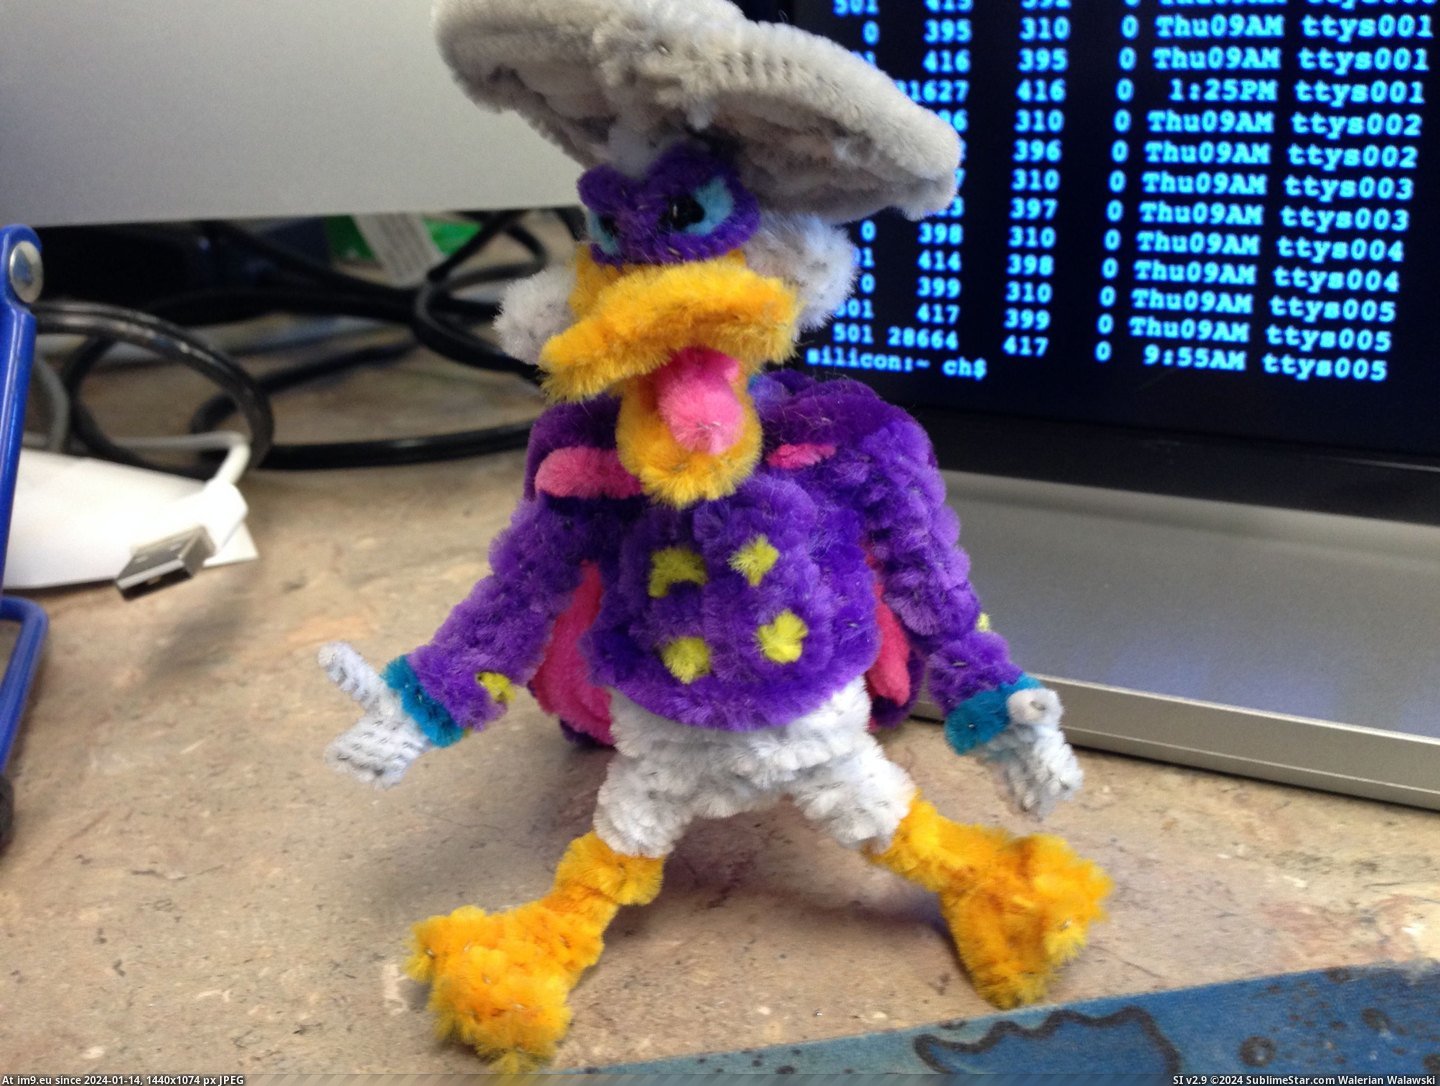 #State #Alaska #Duck #Cleaners #Darkwing #Created #Pipe #Fair [Pics] Darkwing Duck created entirely with pipe cleaners. Found at the Alaska State Fair. Pic. (Изображение из альбом My r/PICS favs))